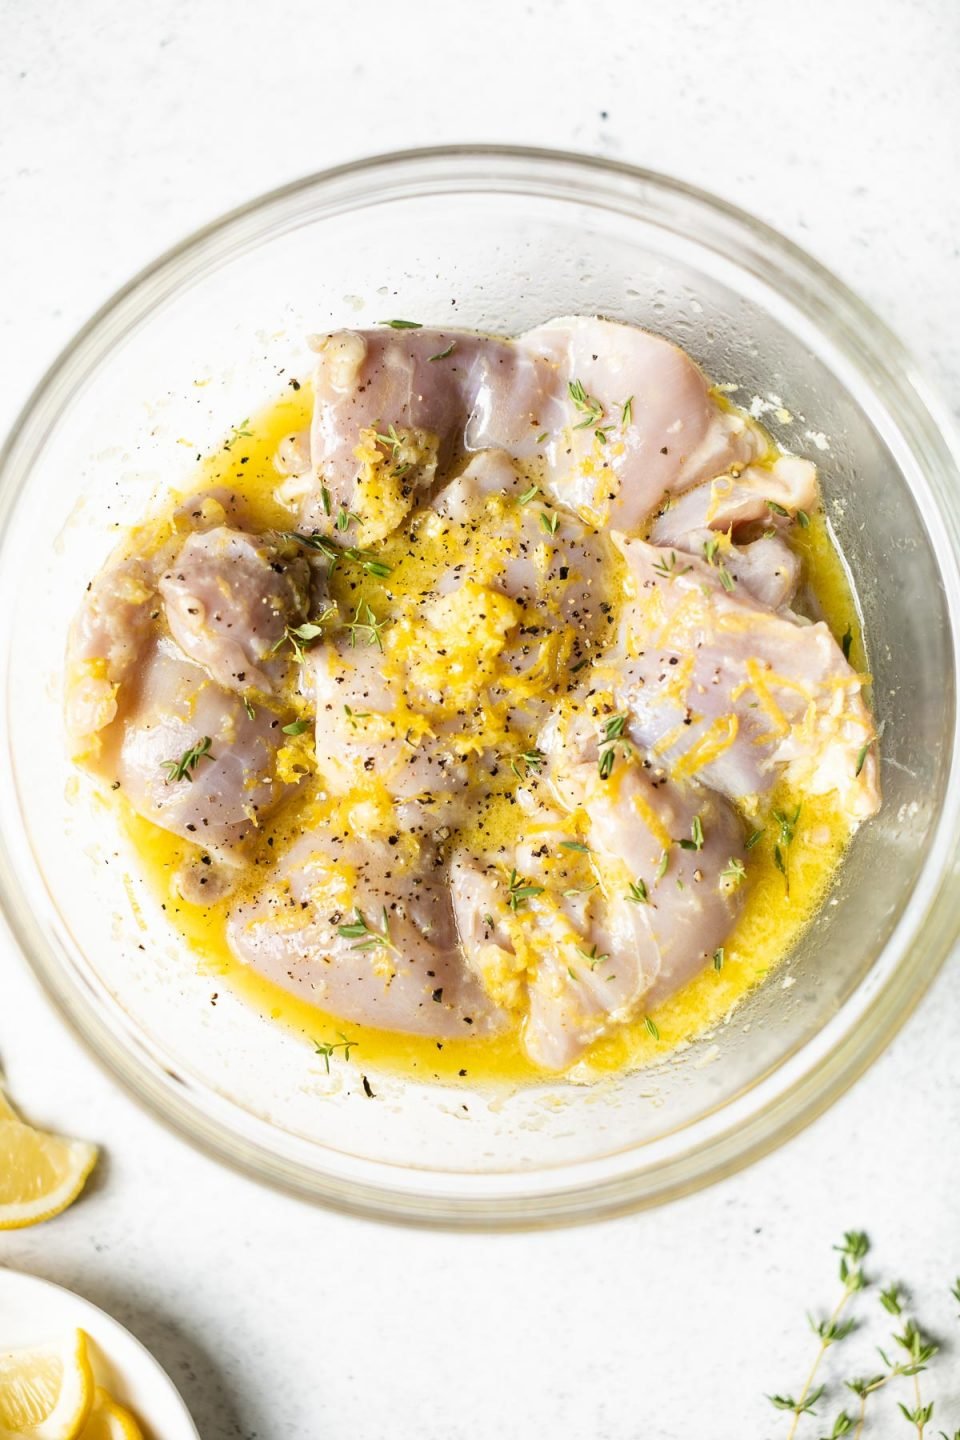 Chicken thighs marinating in the lemon garlic marinade in a glass mixing bowl. The mixing bowl sits atop a white surface with lemon wedges & sprigs of fresh theyme.